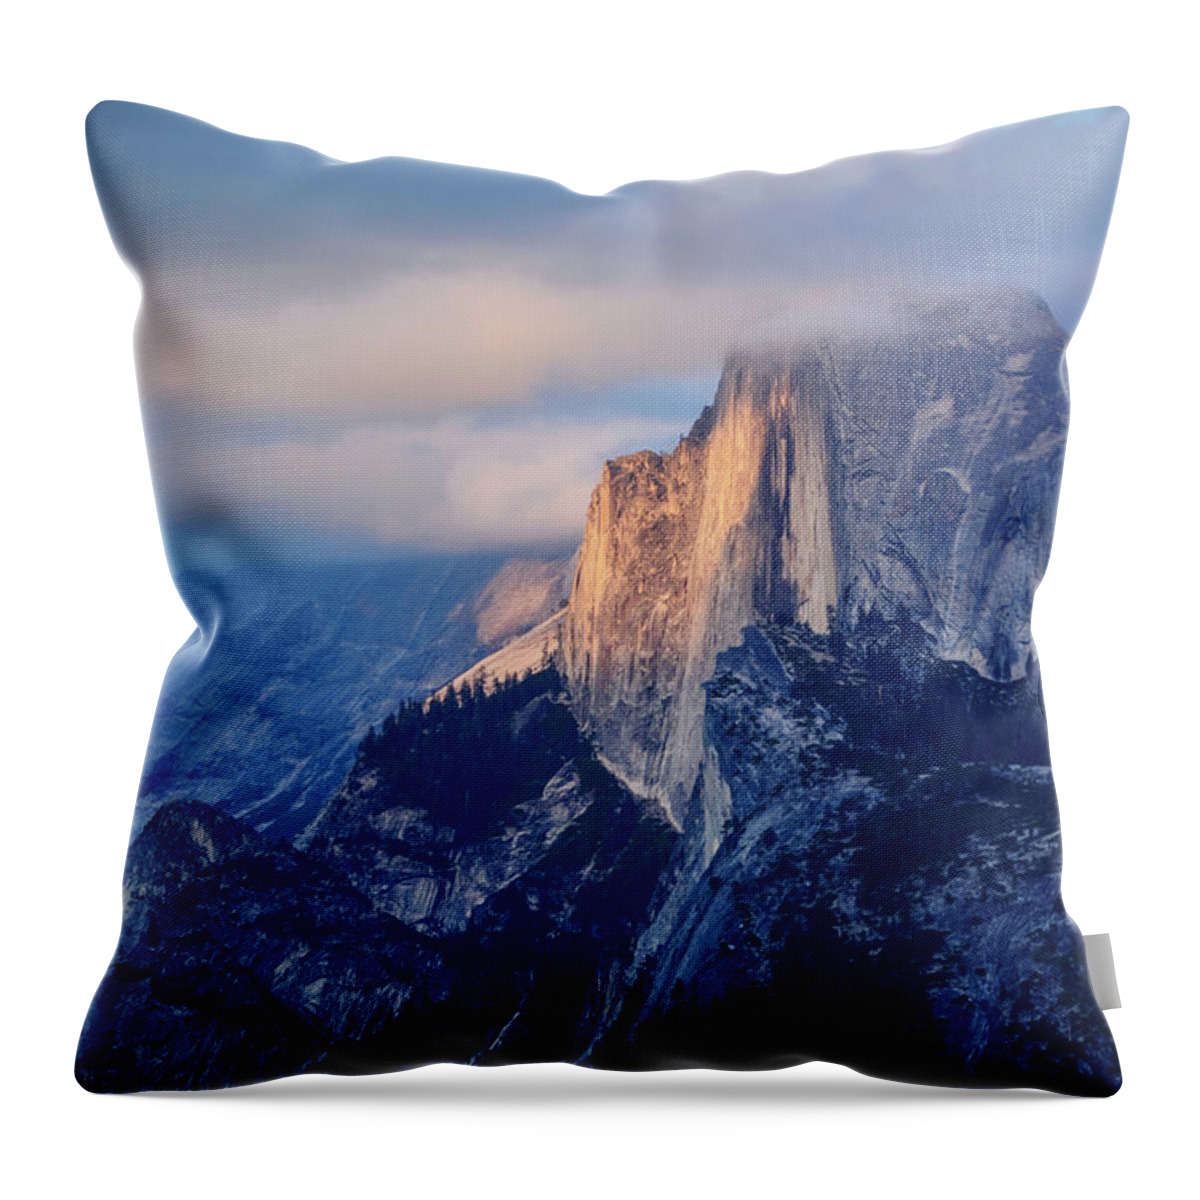 Yosemite National Park Throw Pillow featuring the photograph Glacier Point Yosemite Sunset by Kyle Hanson